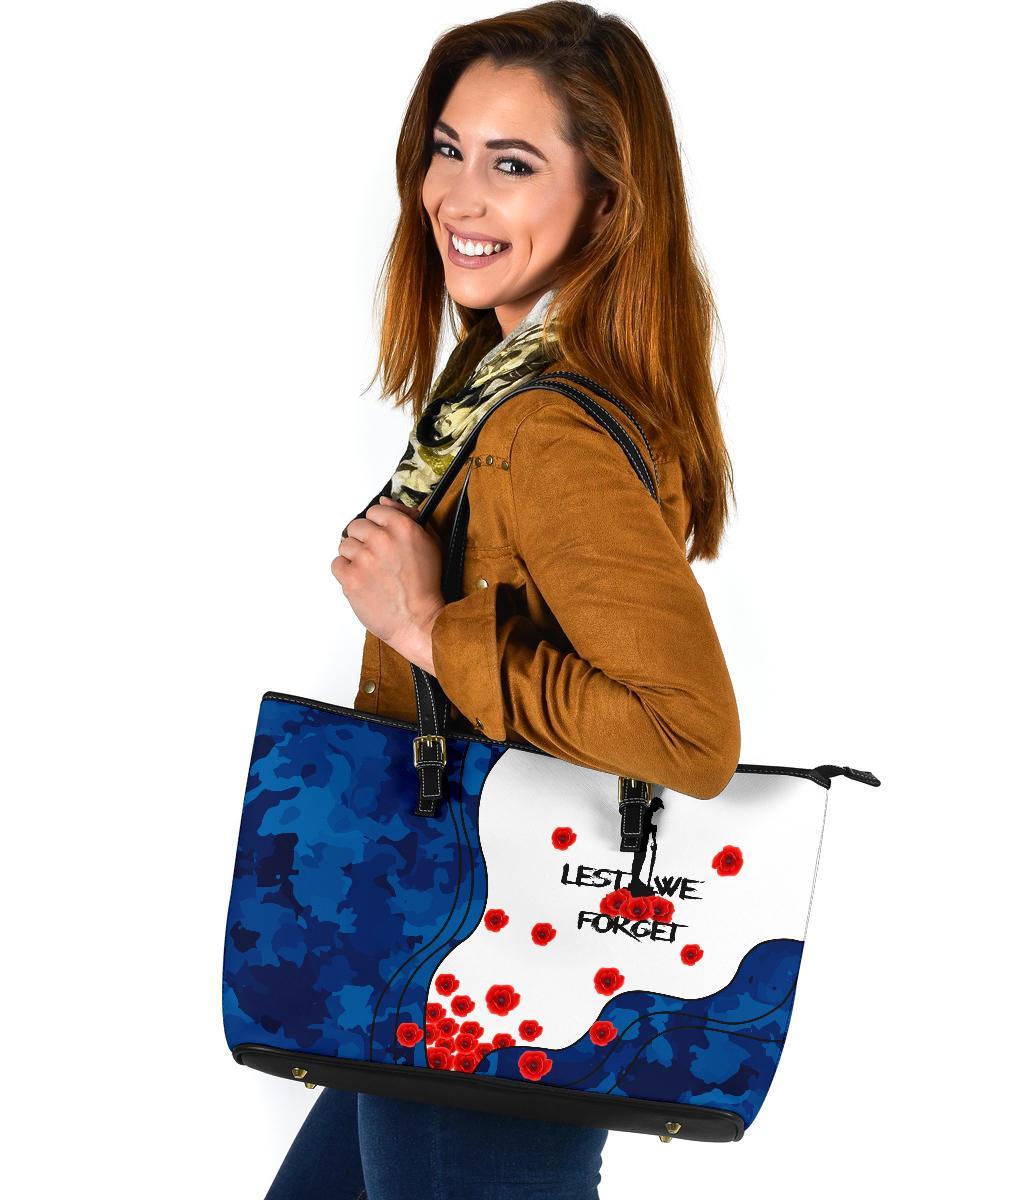 anzac-lest-we-forget-large-leather-tote-bag-australian-flag-blue